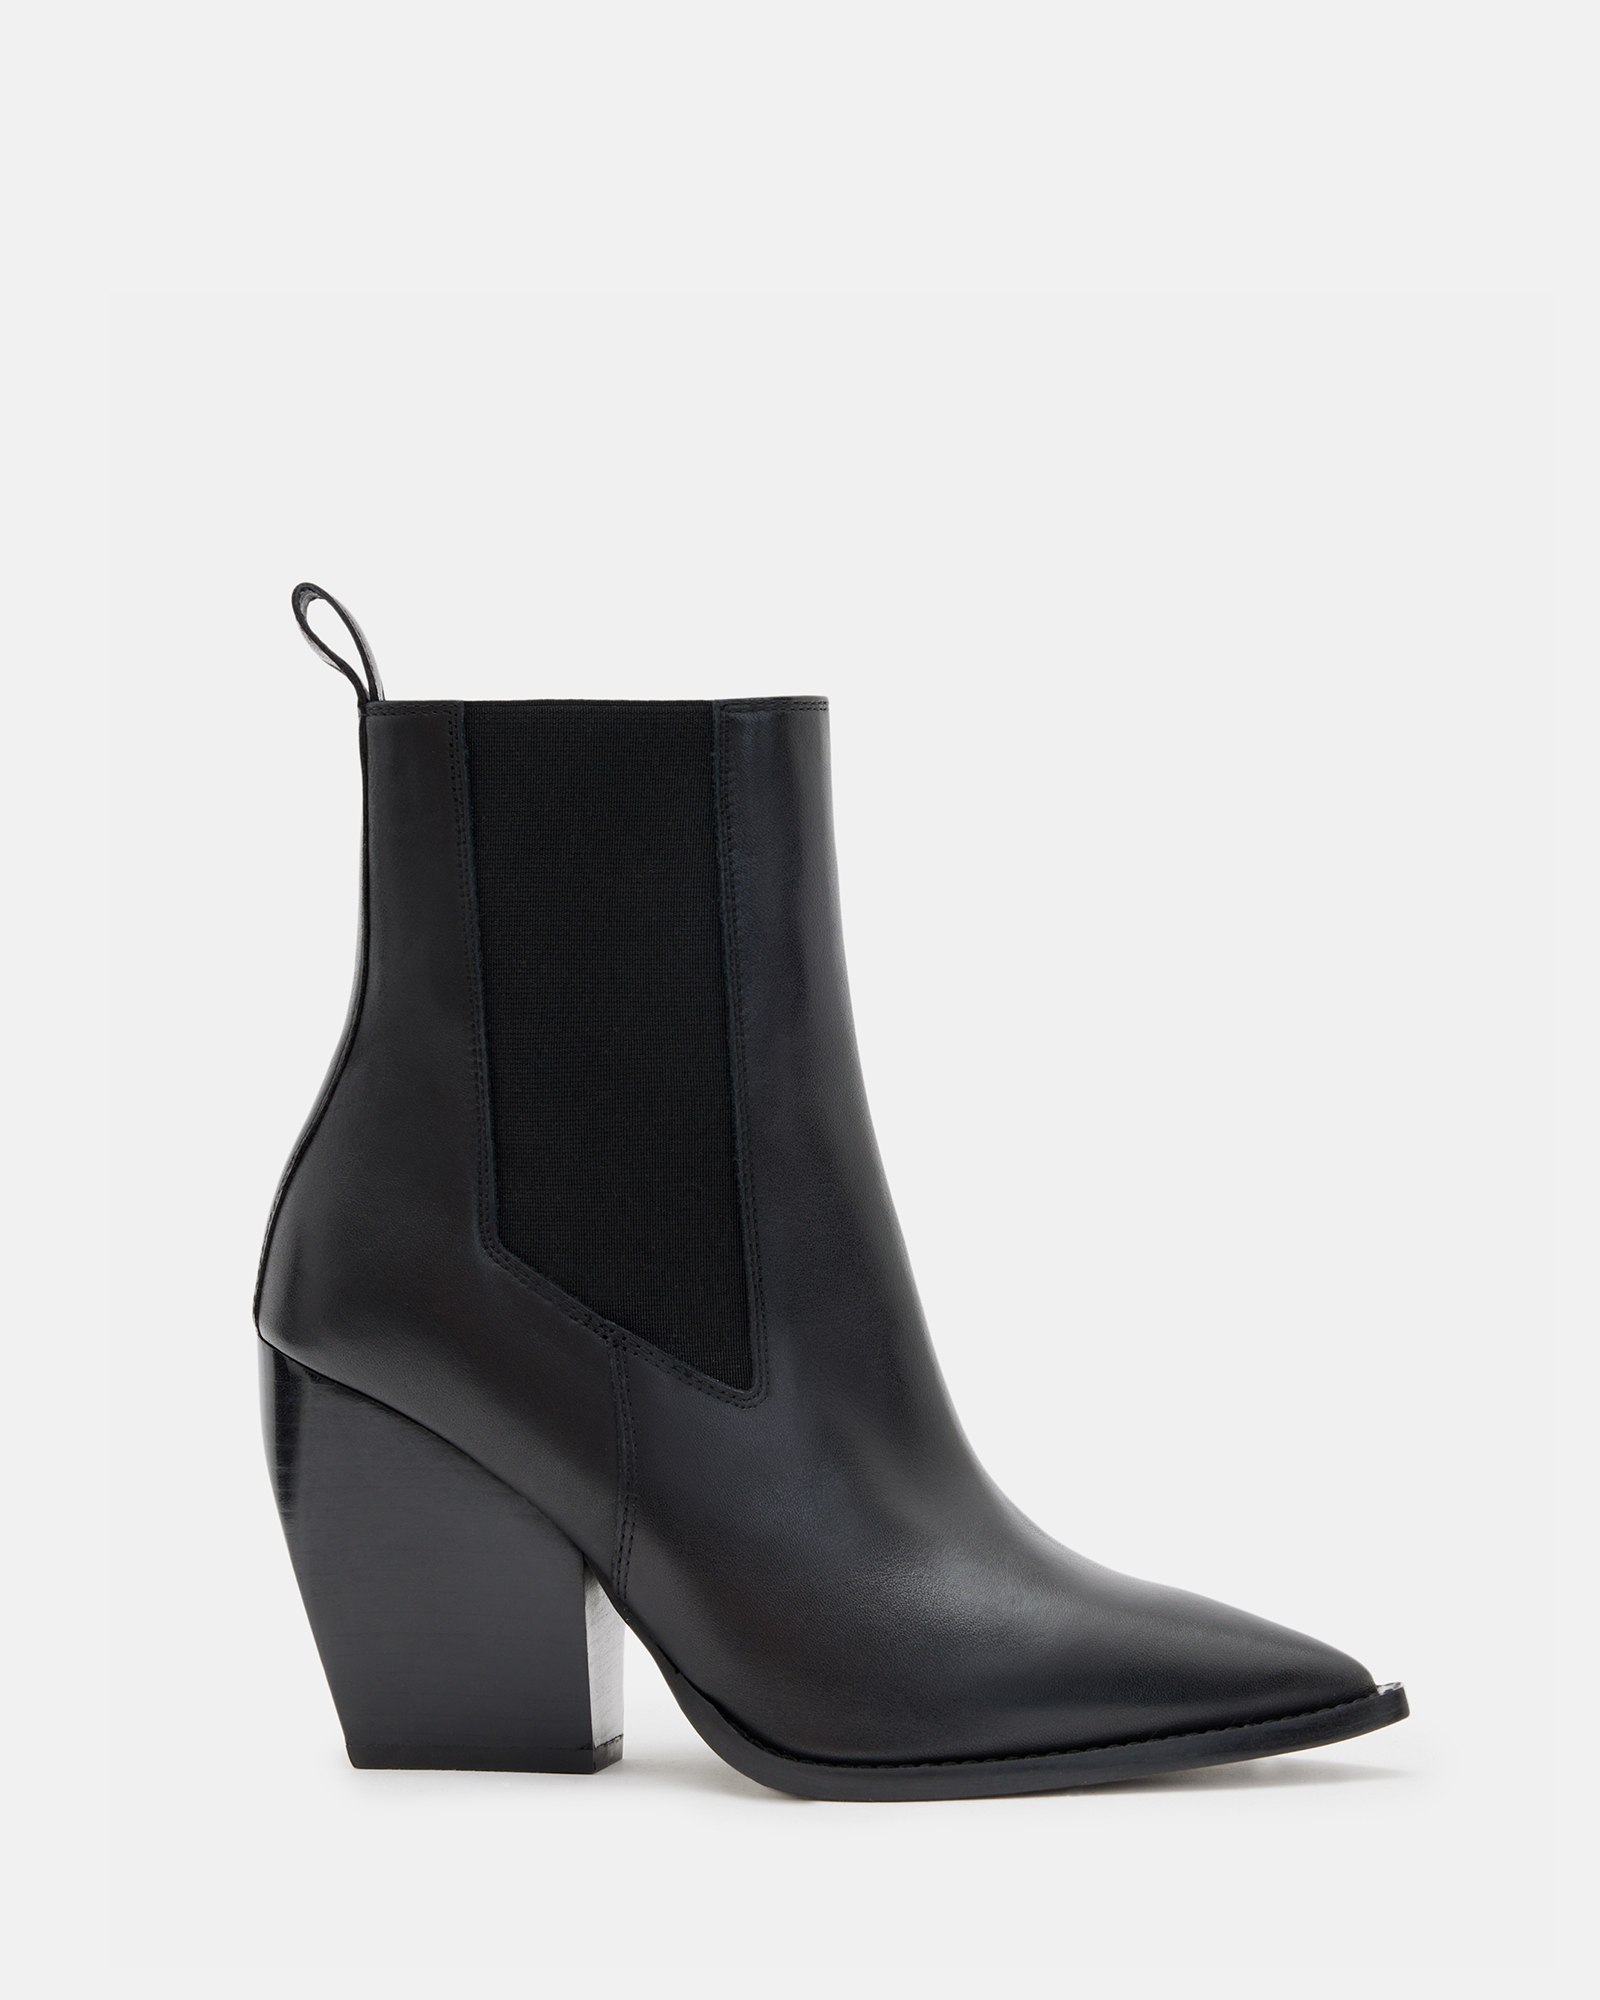 AllSaints Ria Pointed Toe Leather Boots,, Black